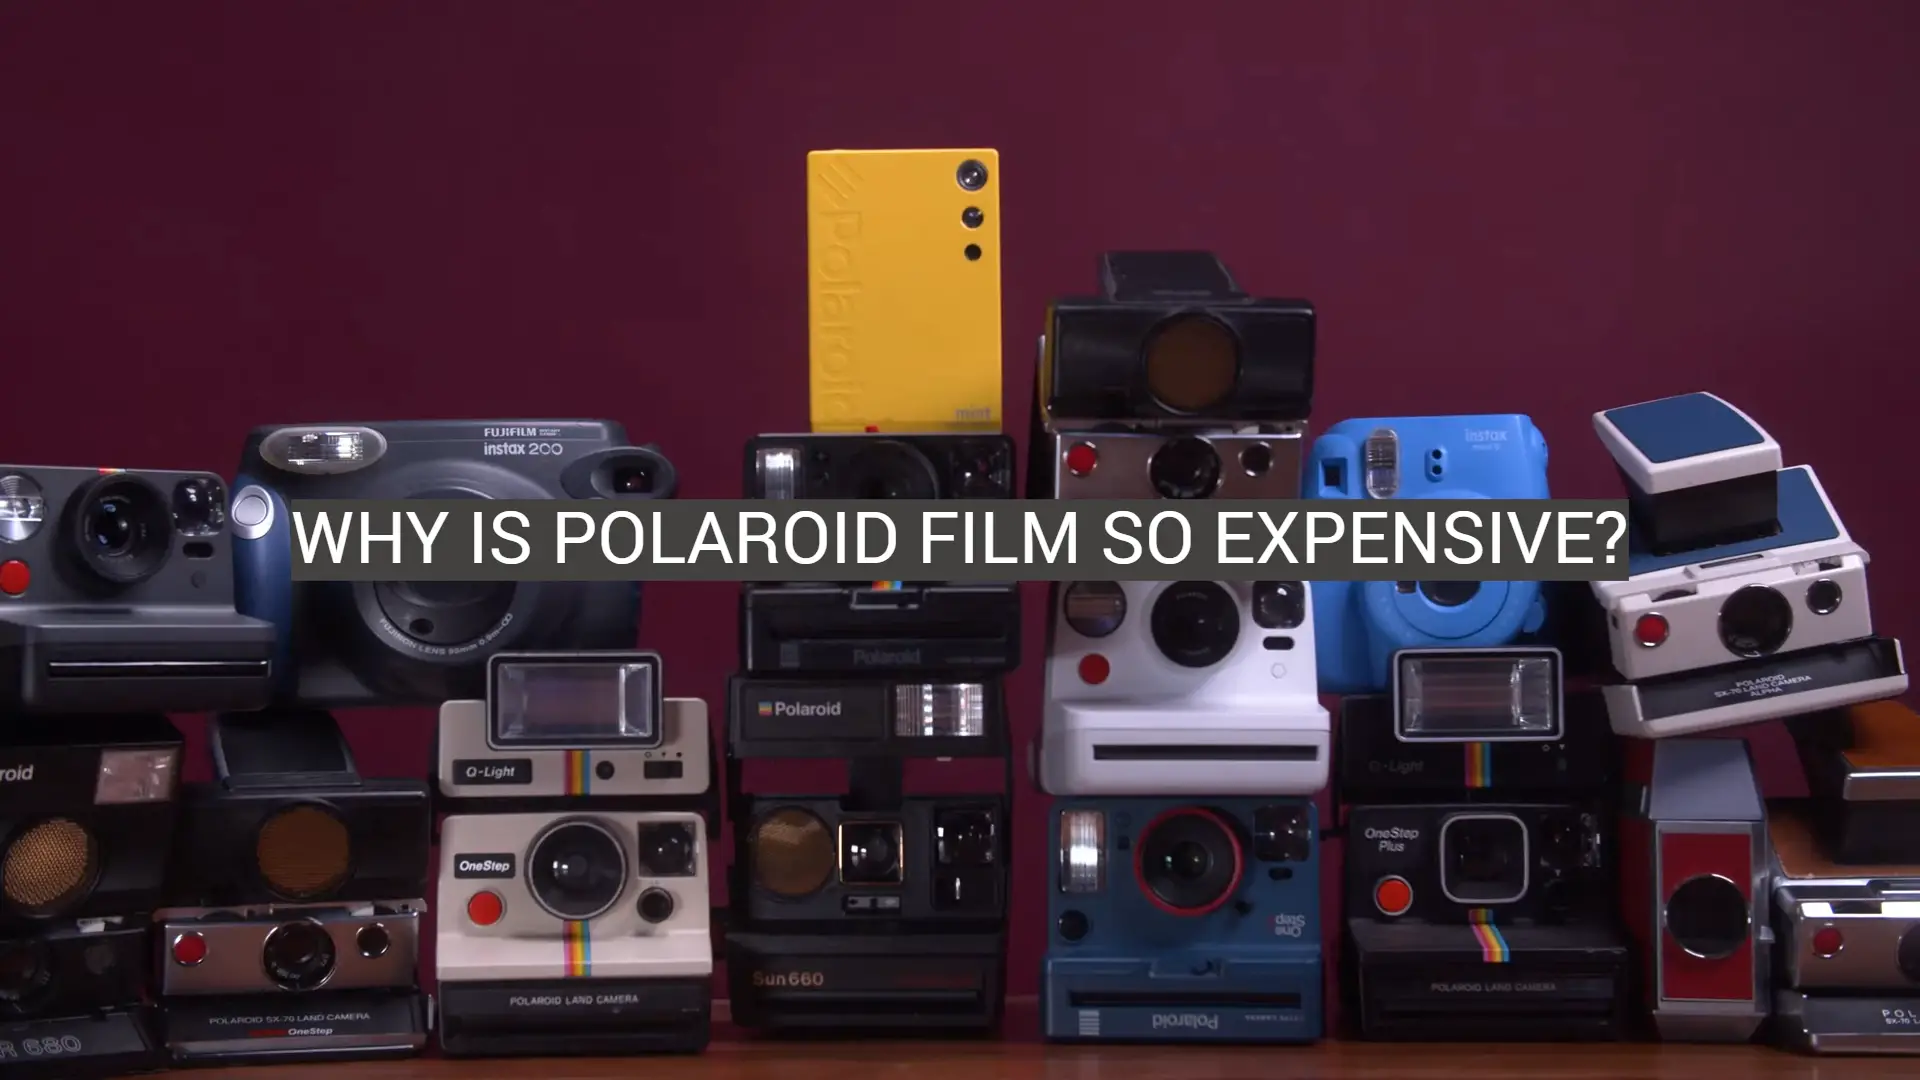 Why Is Polaroid Film So Expensive?